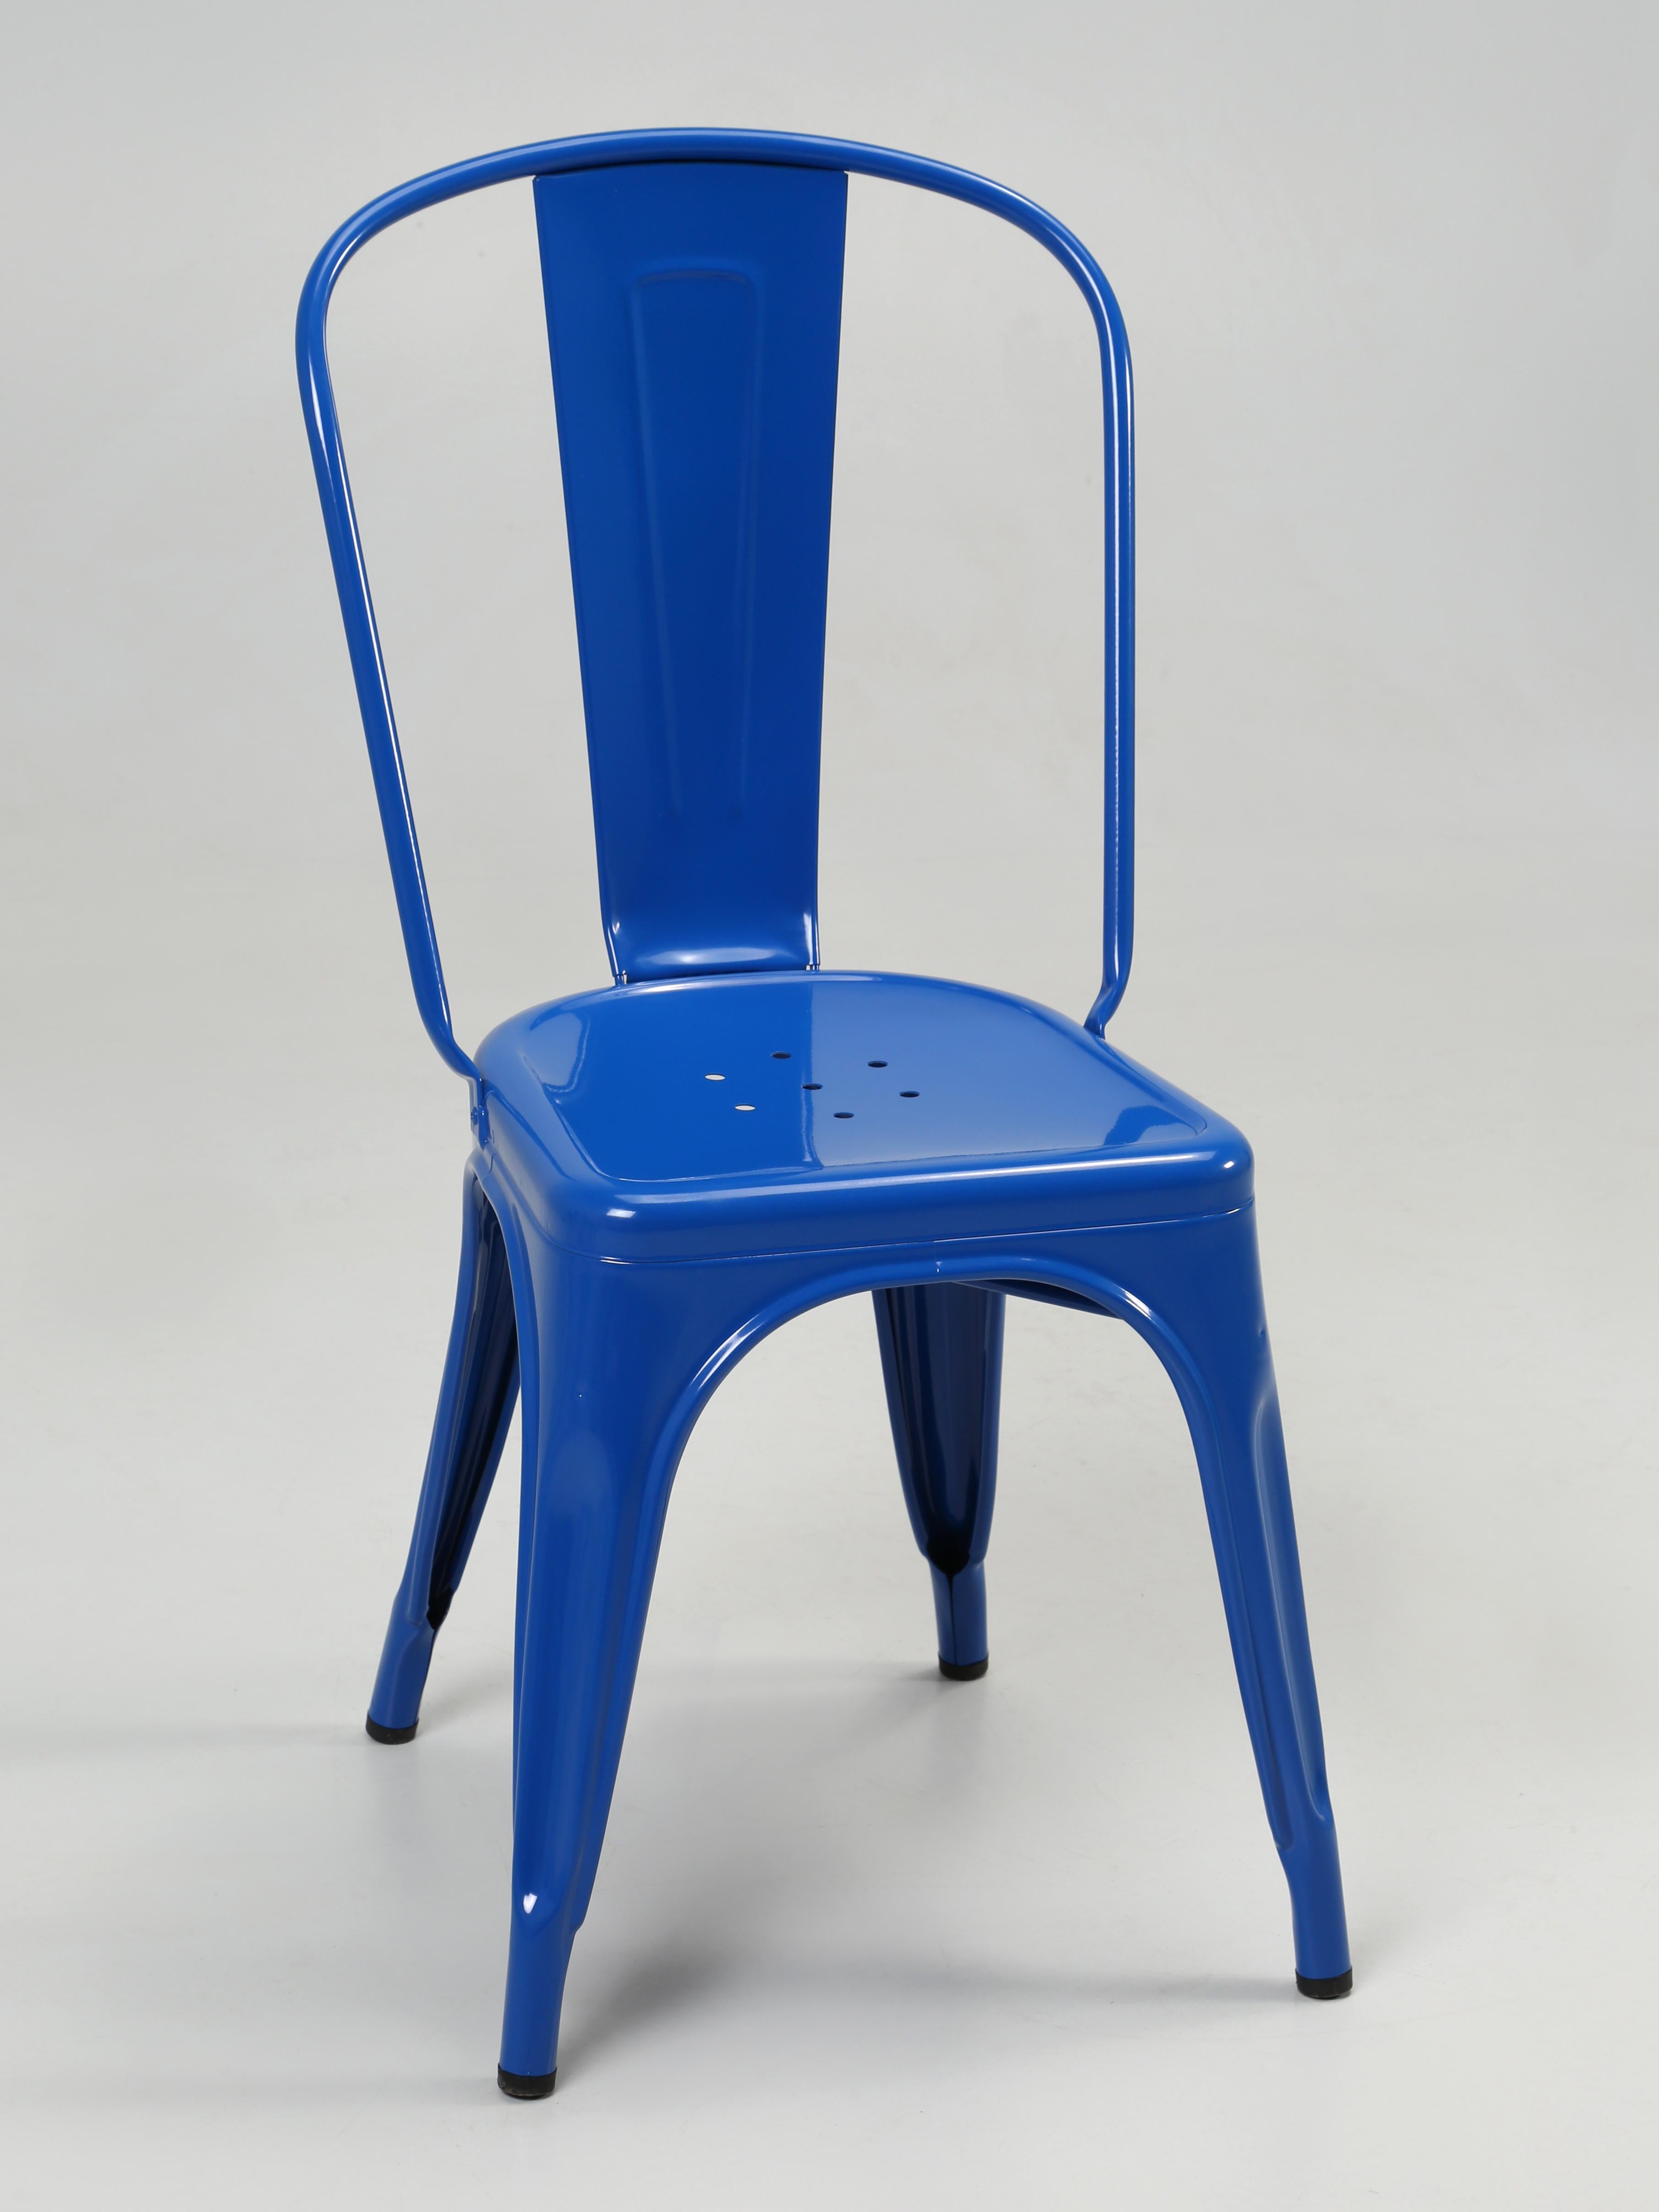 Industrial Genuine French Tolix Steel Stacking Chairs '4' Brilliant Blue Showroom Samples